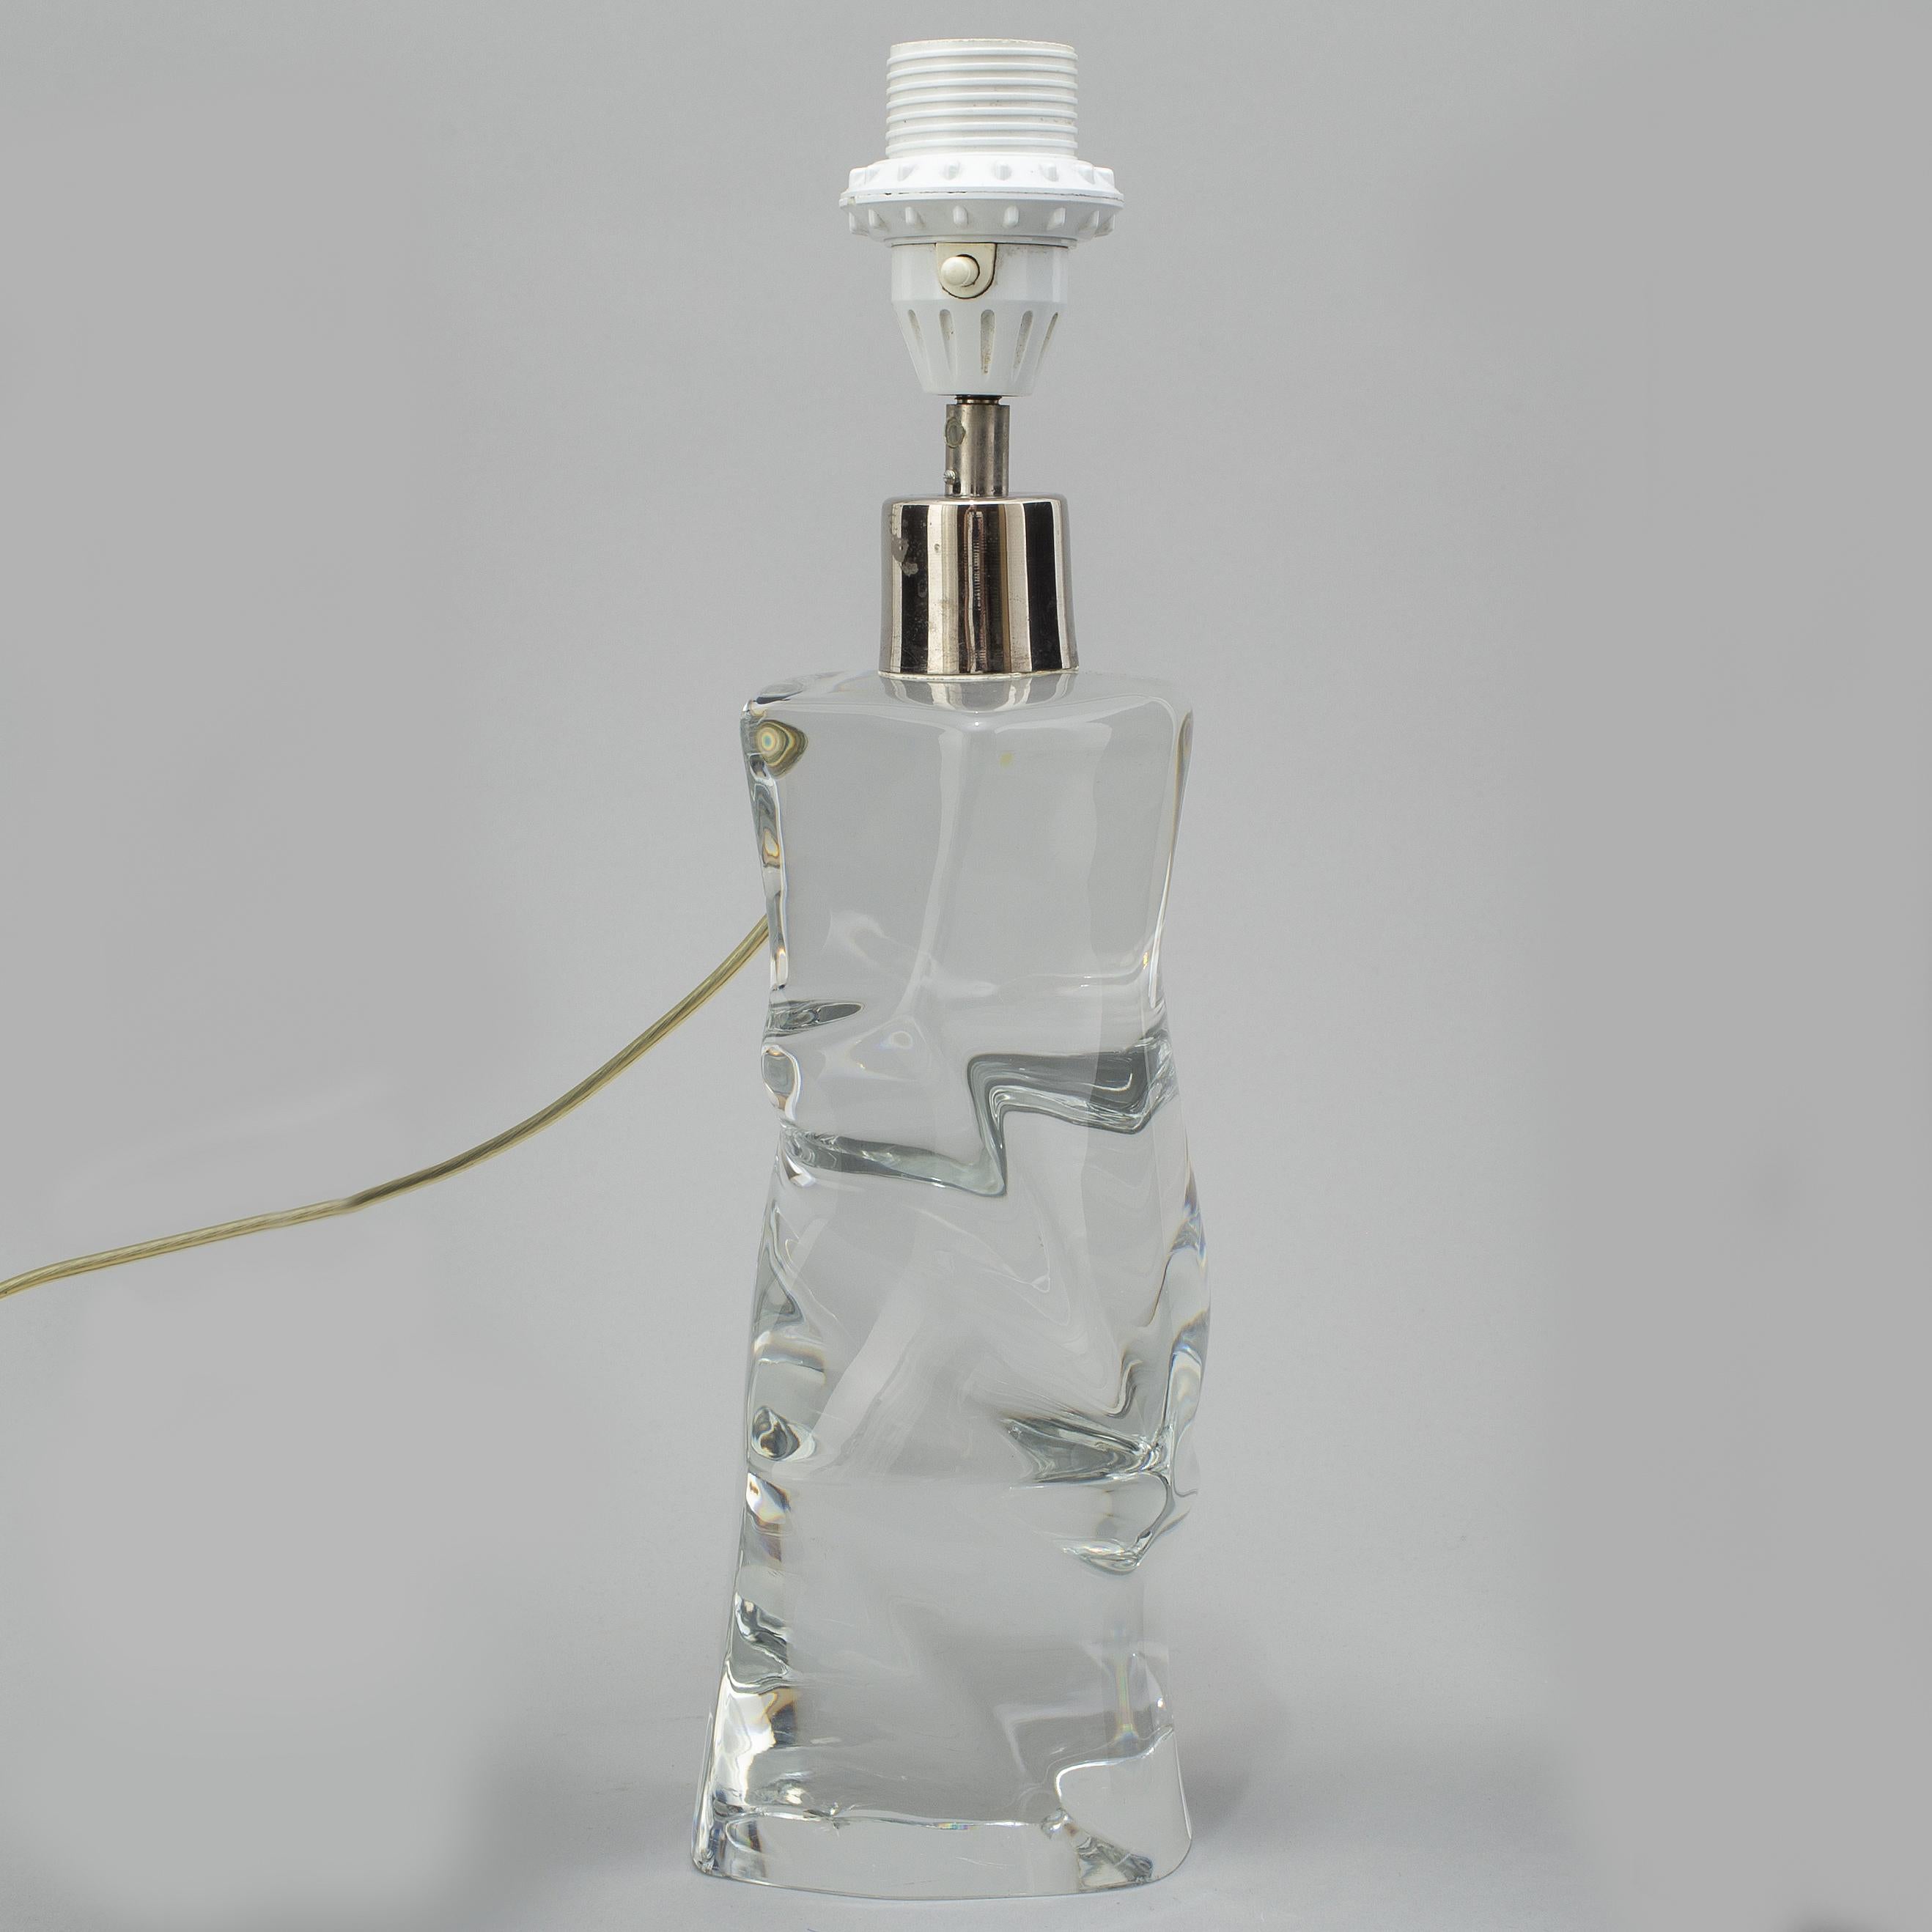 Signed table lamp made by Orrefors, in solid clear crystal with chrome trim, Olle Alberius, Sweden, 1970.
Rarely seen lamps designed by Olle Alberius, solid crystal lamp bases with a single chrome trim with original sticker.
Good condition.